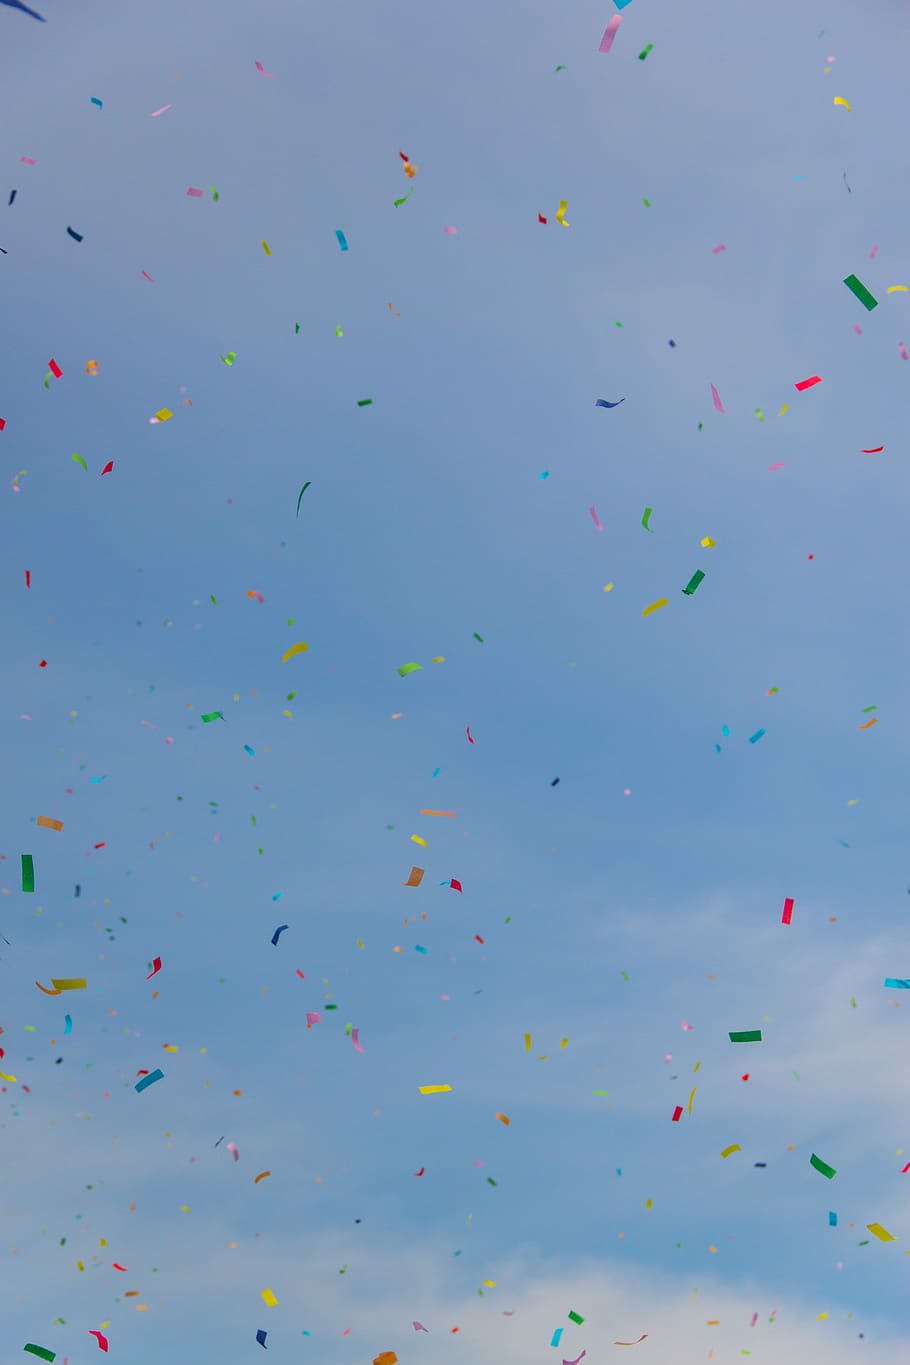 falling, sky, Air, Merry, Party, Confetti, backgrounds, multi Colored, blue, abstract